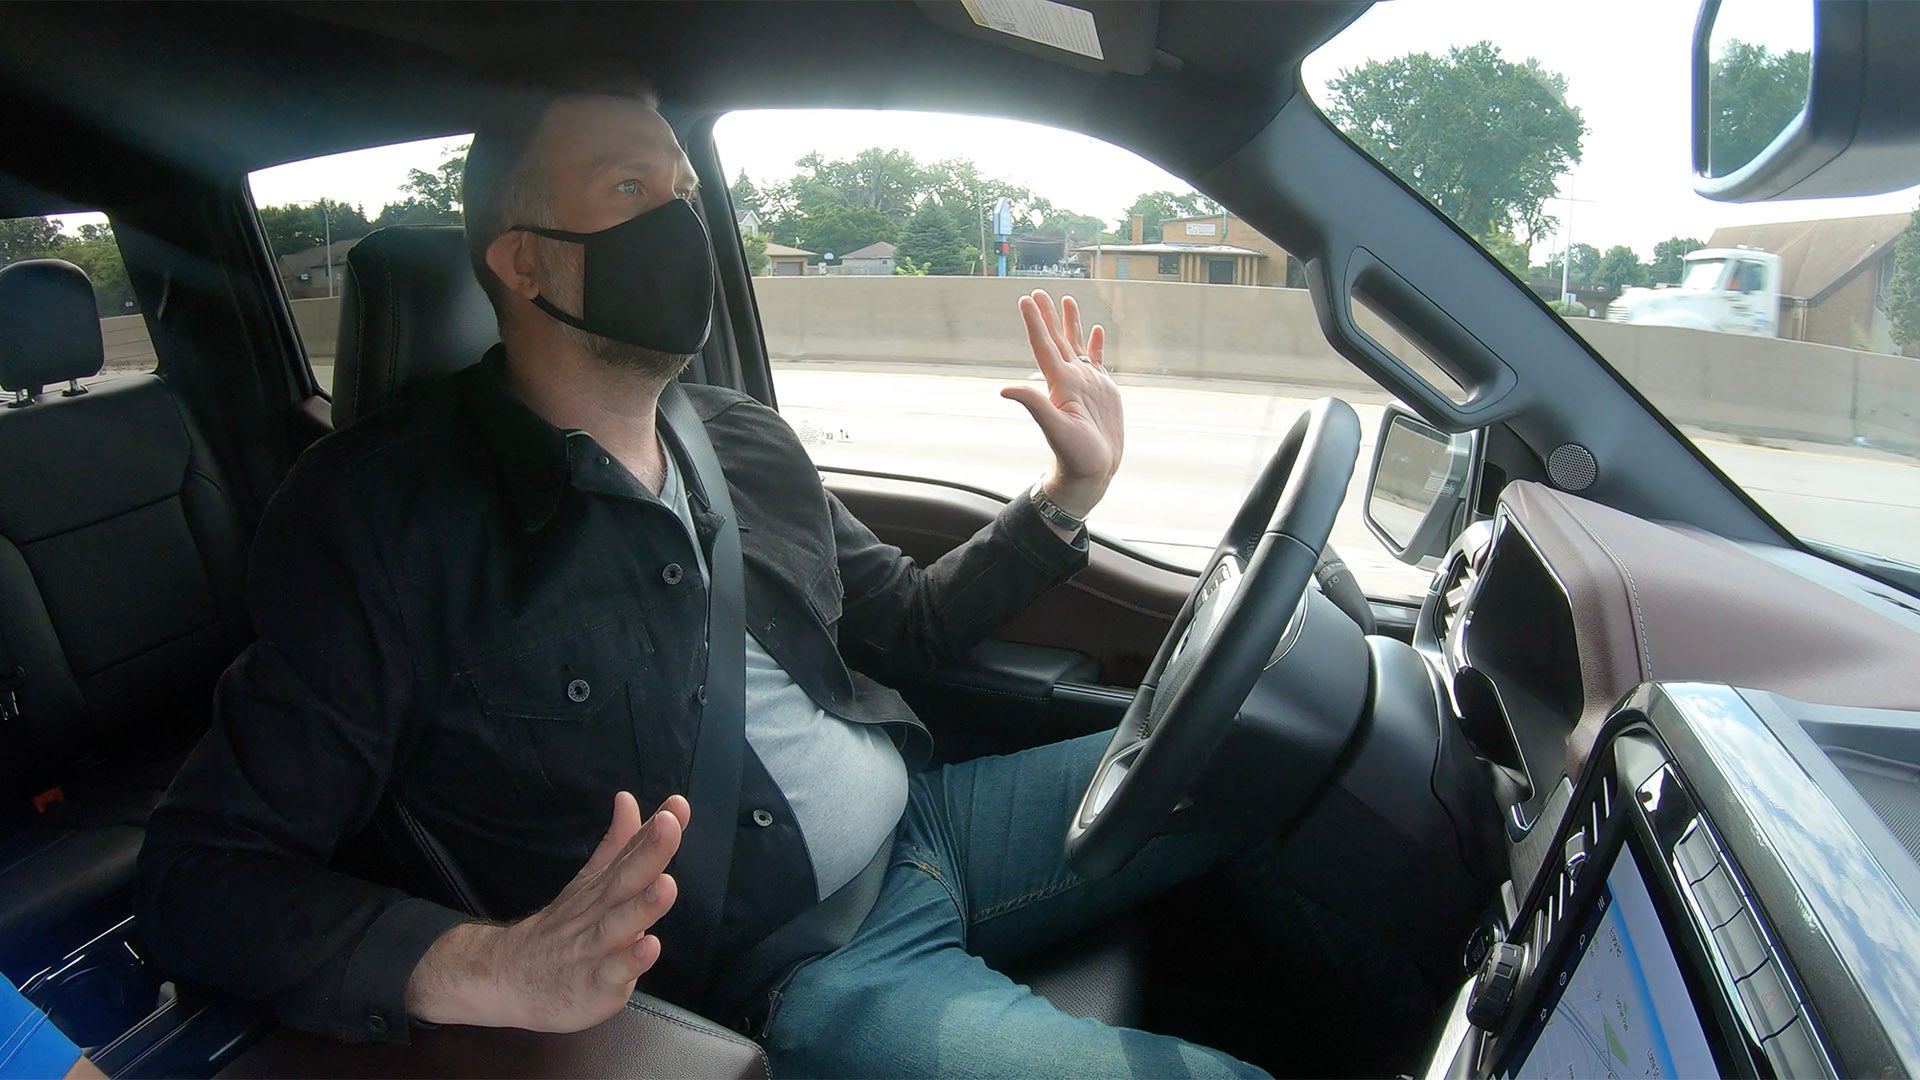 Ford Blue Cruise hands-free driving assistance